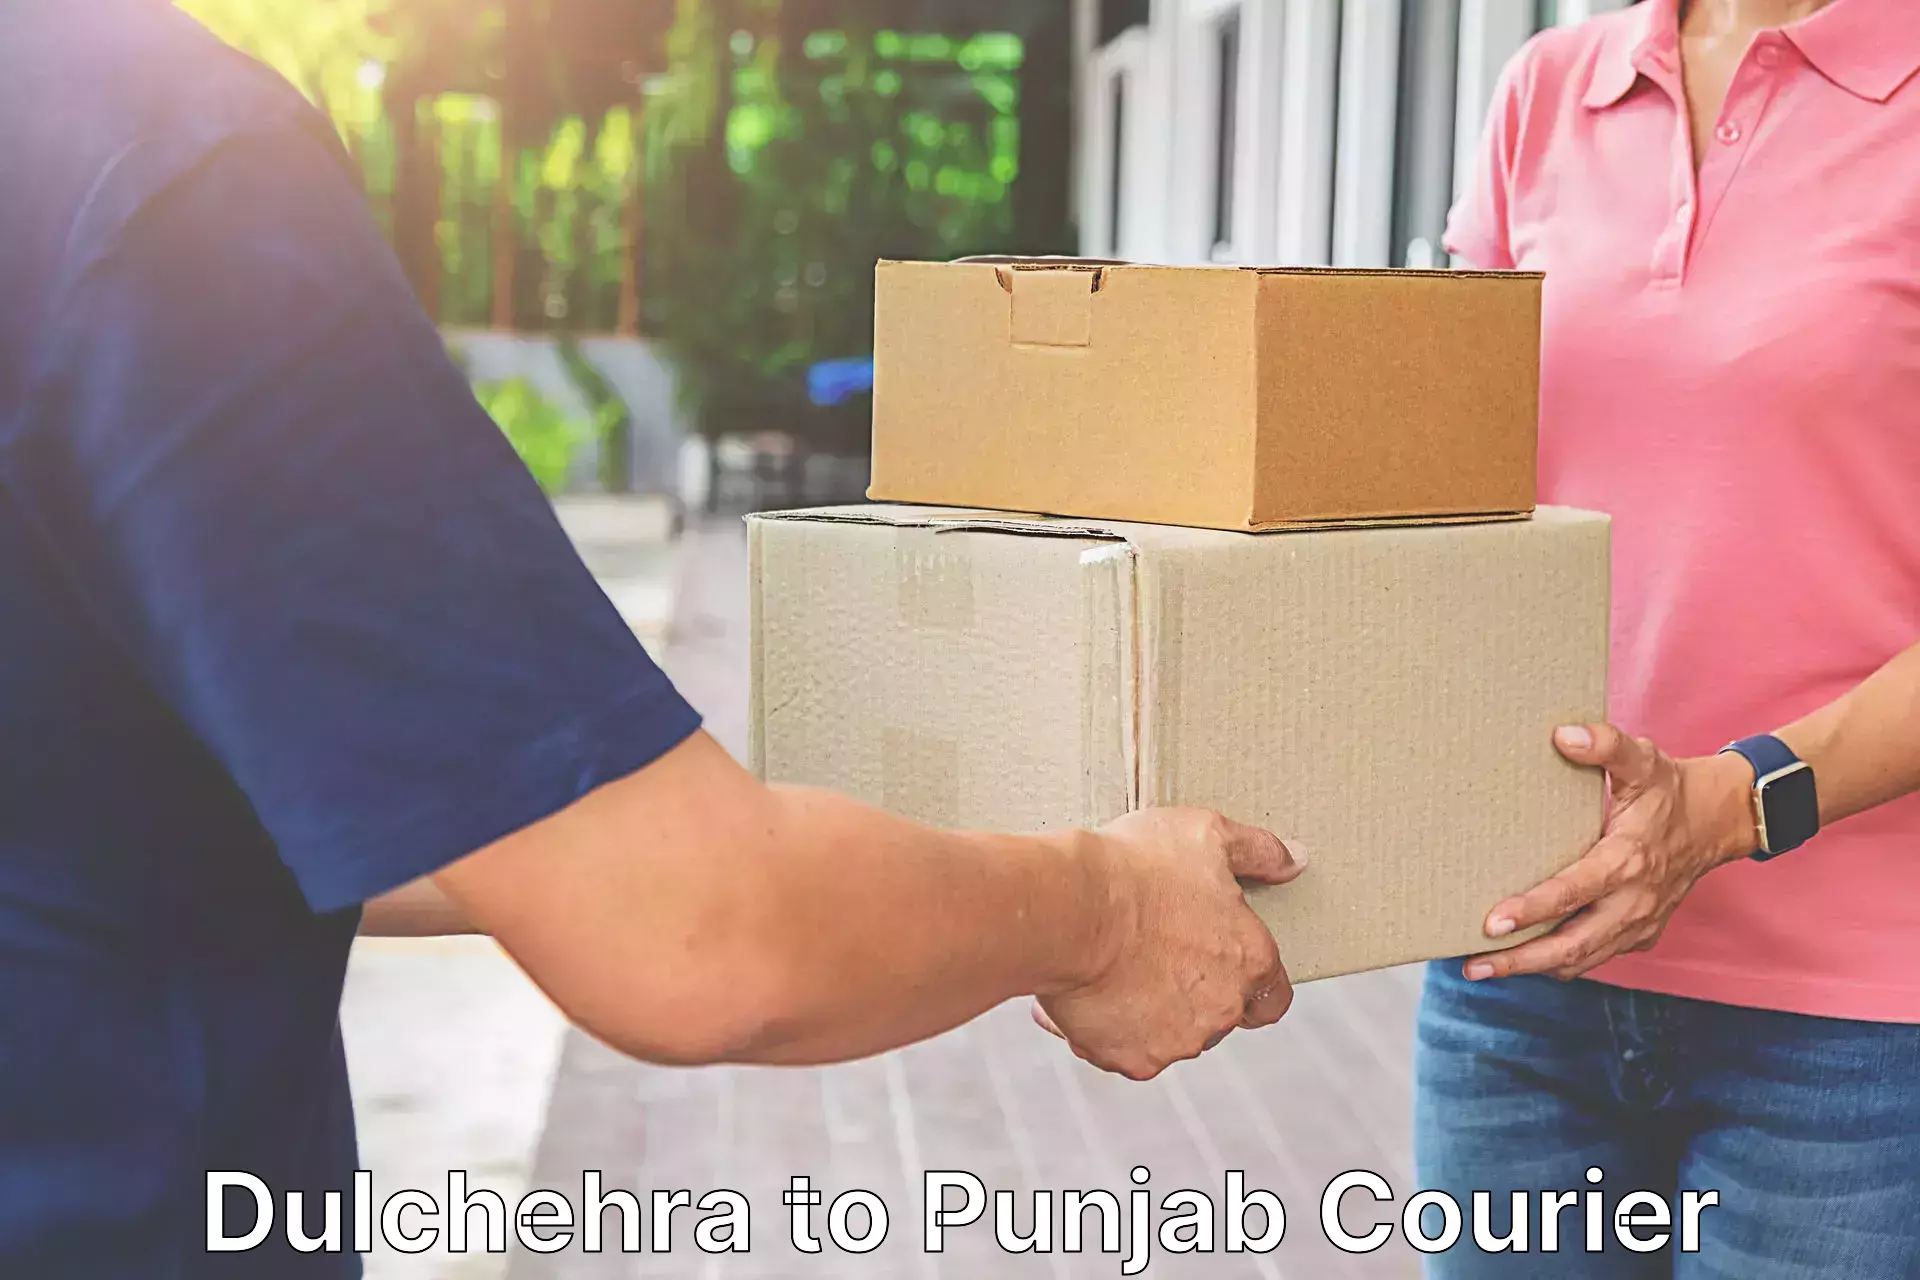 Full-service courier options Dulchehra to Punjab